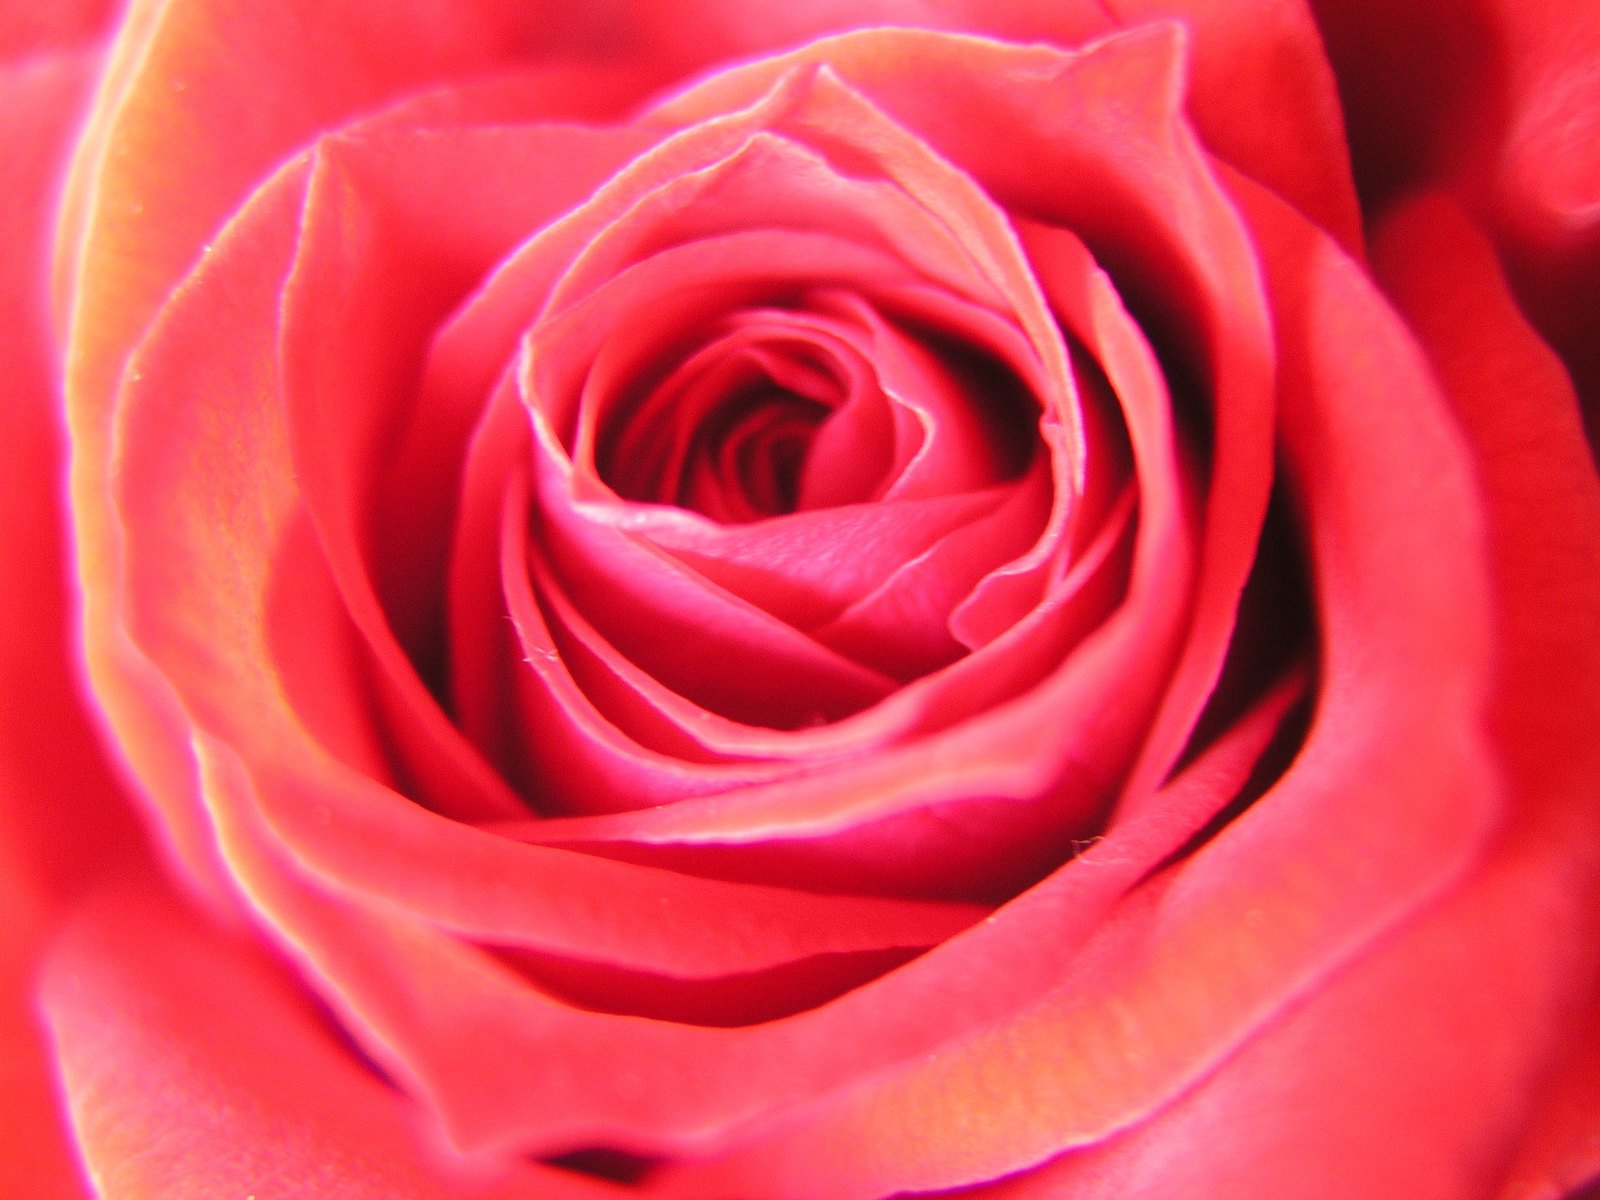 a close up of the center of a pink rose